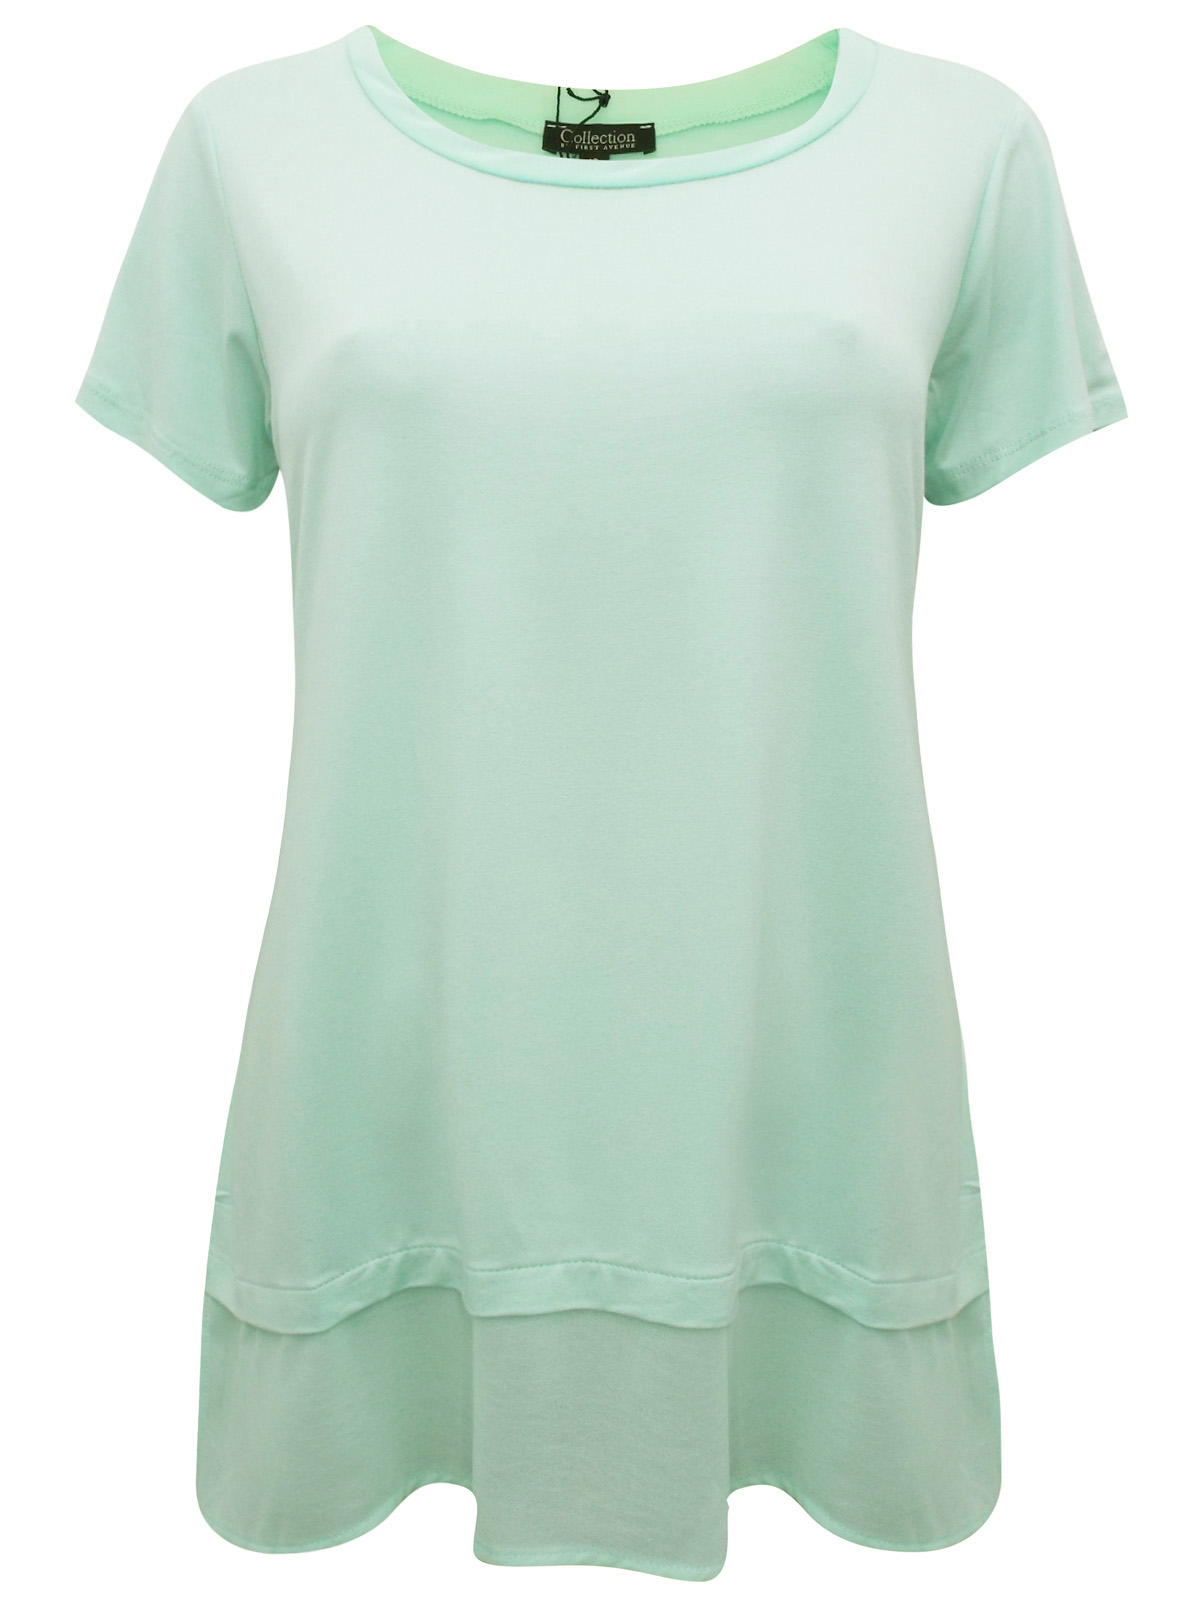 First Avenue MINT Short Sleeve Chiffon Panel Top - Size 10 to 20